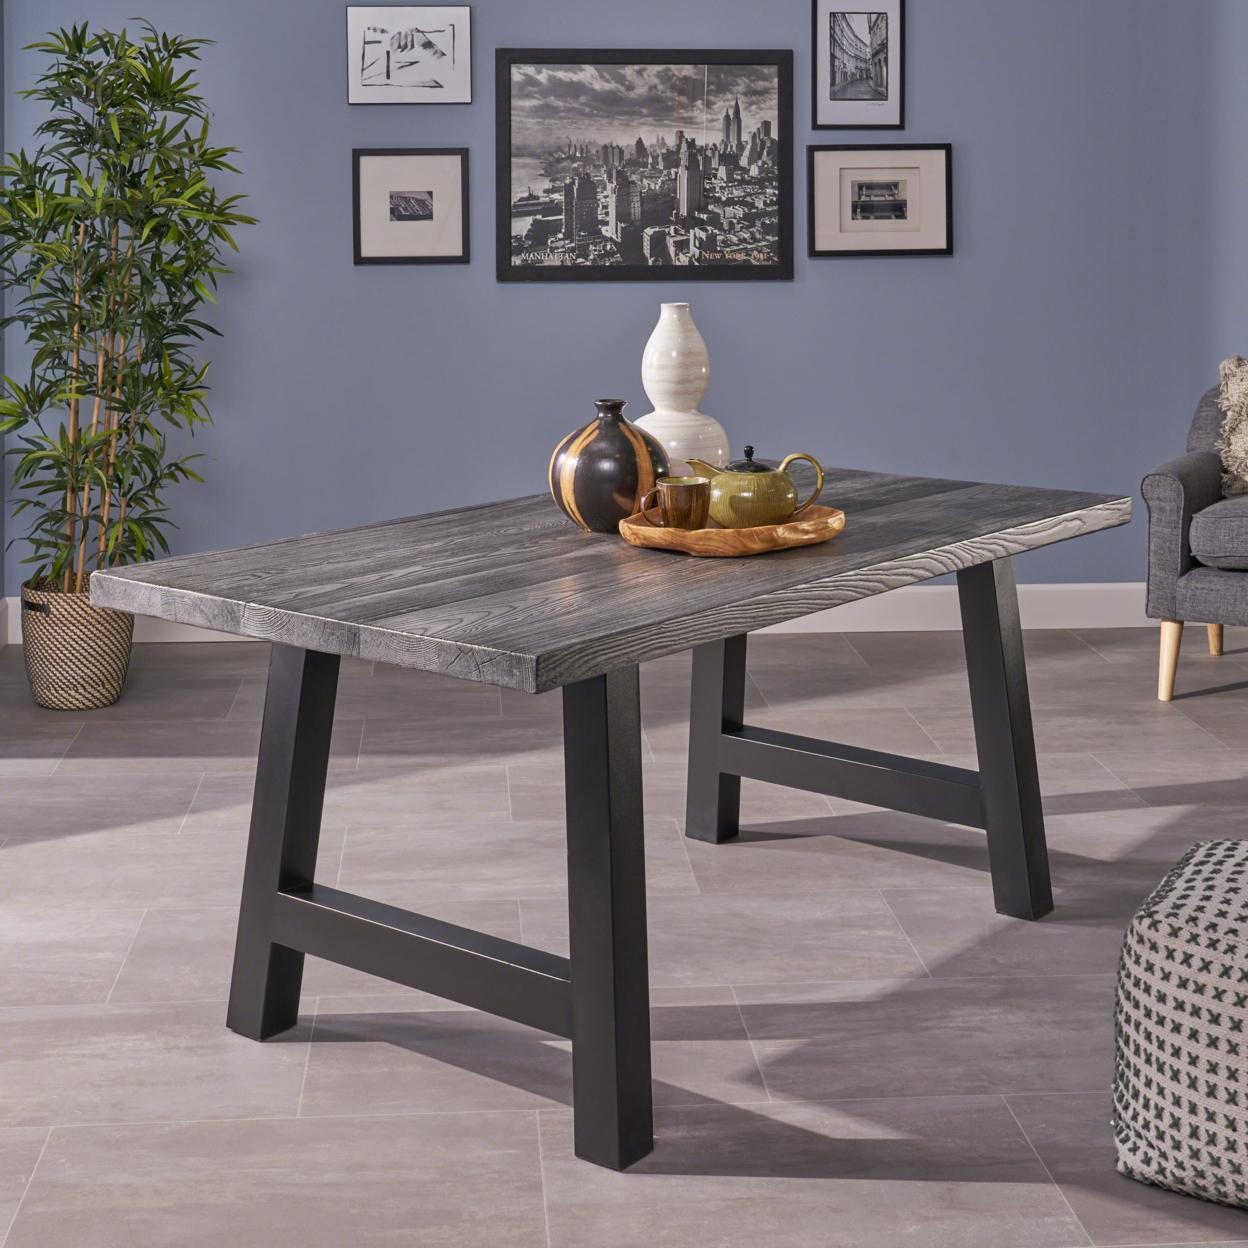 Edward Indoor Light Weight Concrete Dining Table - Natural Gray